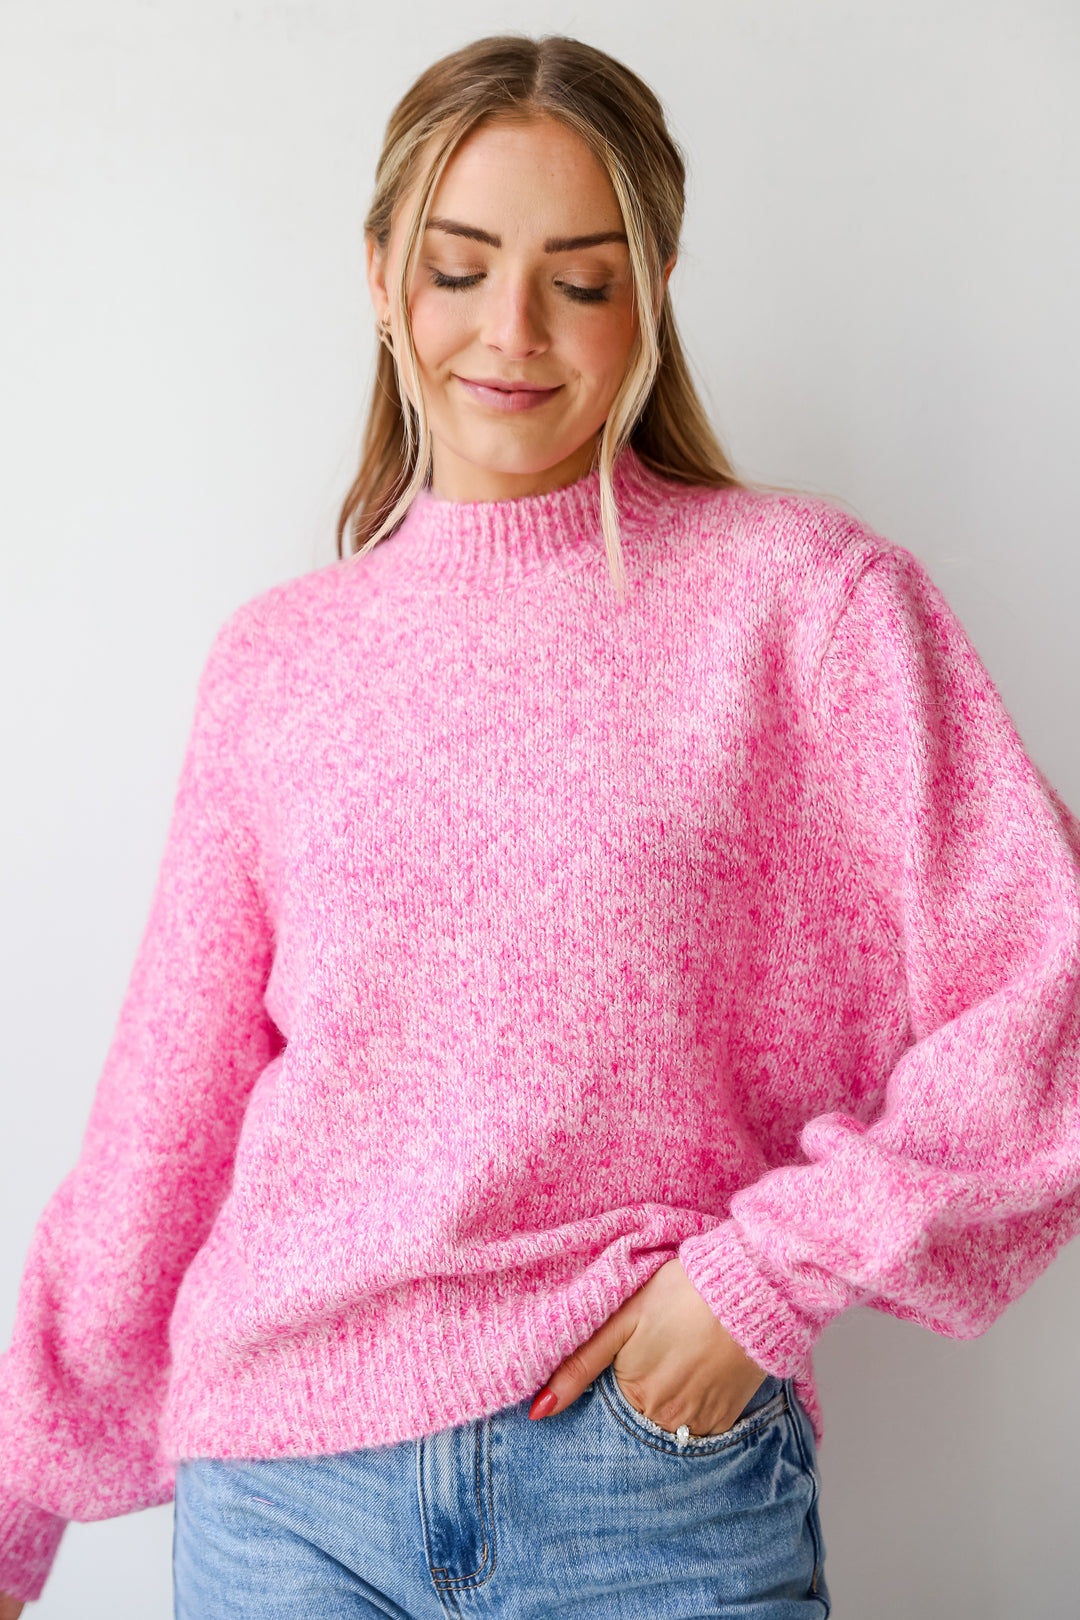 pink Oversized Sweater on model